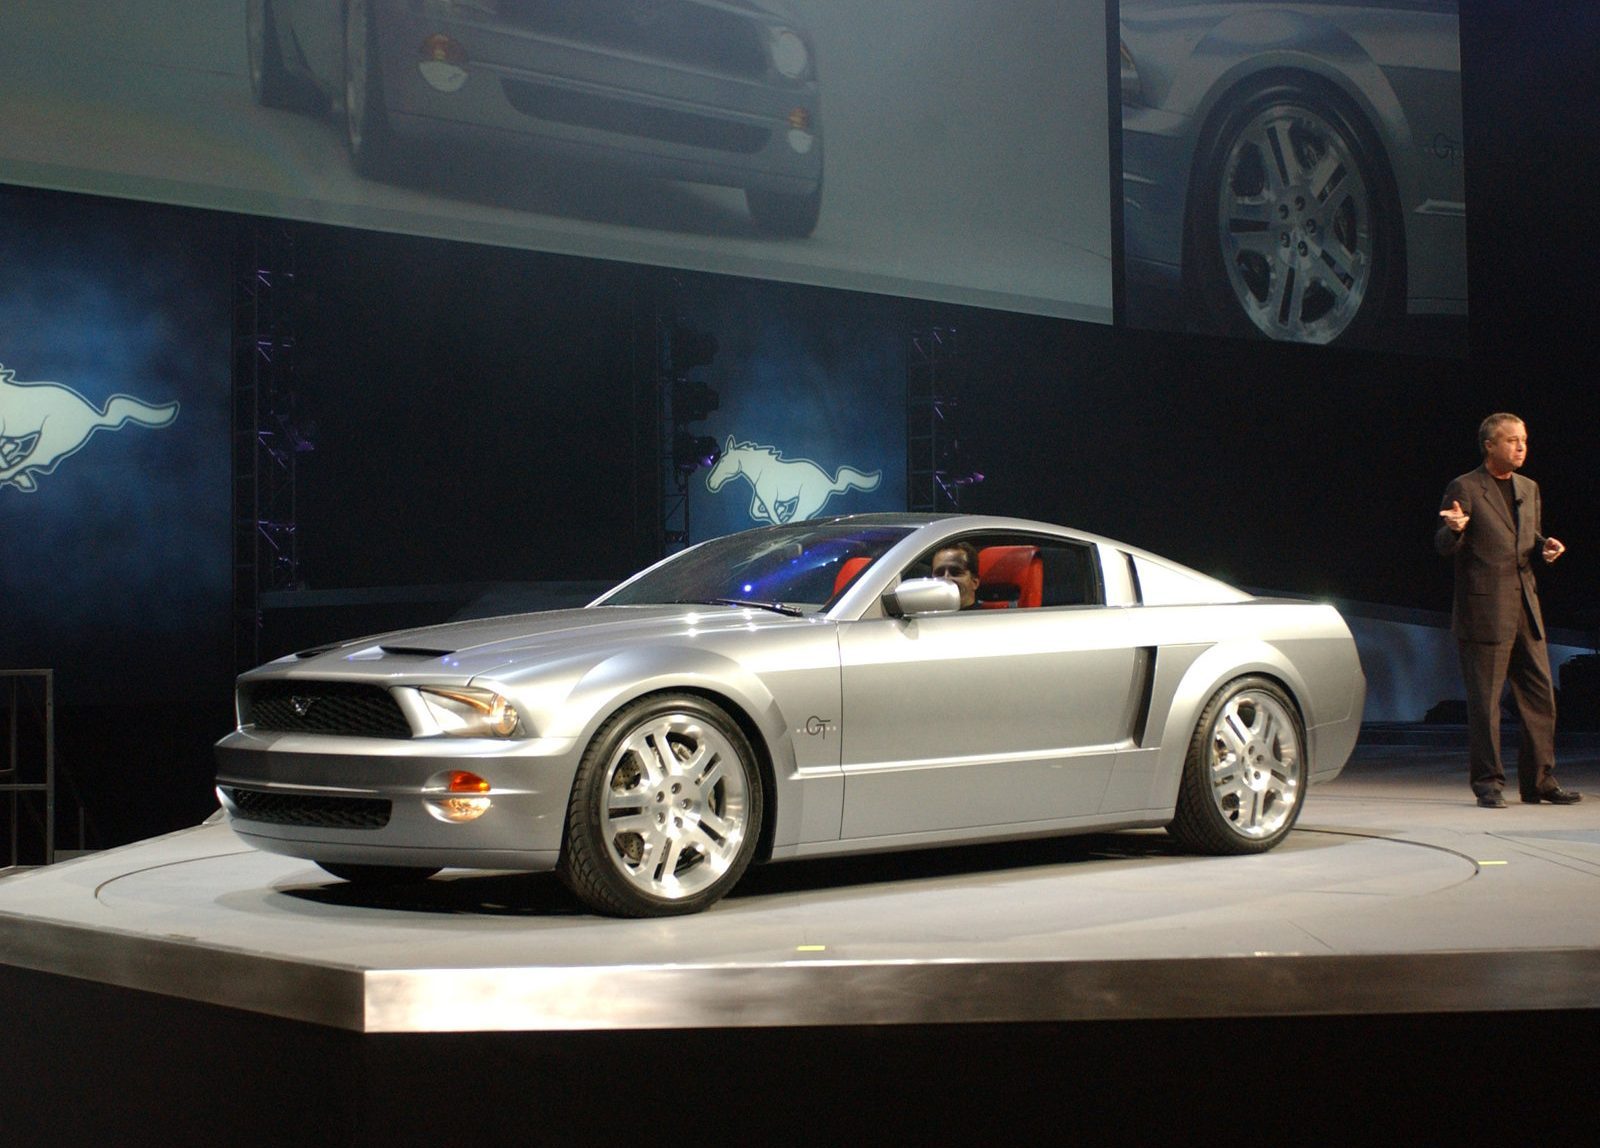 Mustang Of The Day: 2003 Ford Mustang GT Concept